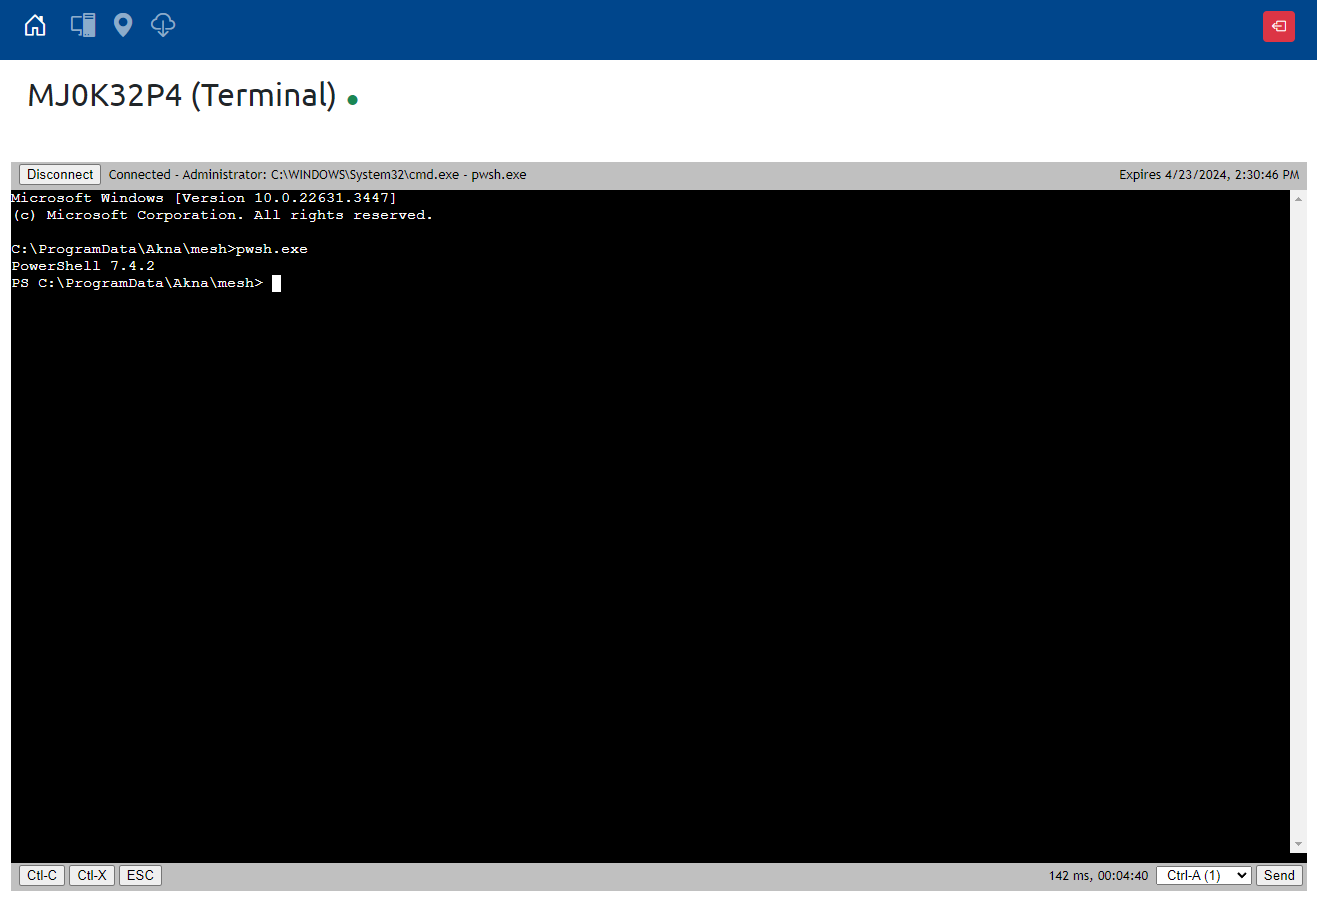 Opening PowerShell 7.4.2 version using the Akna remote command-line